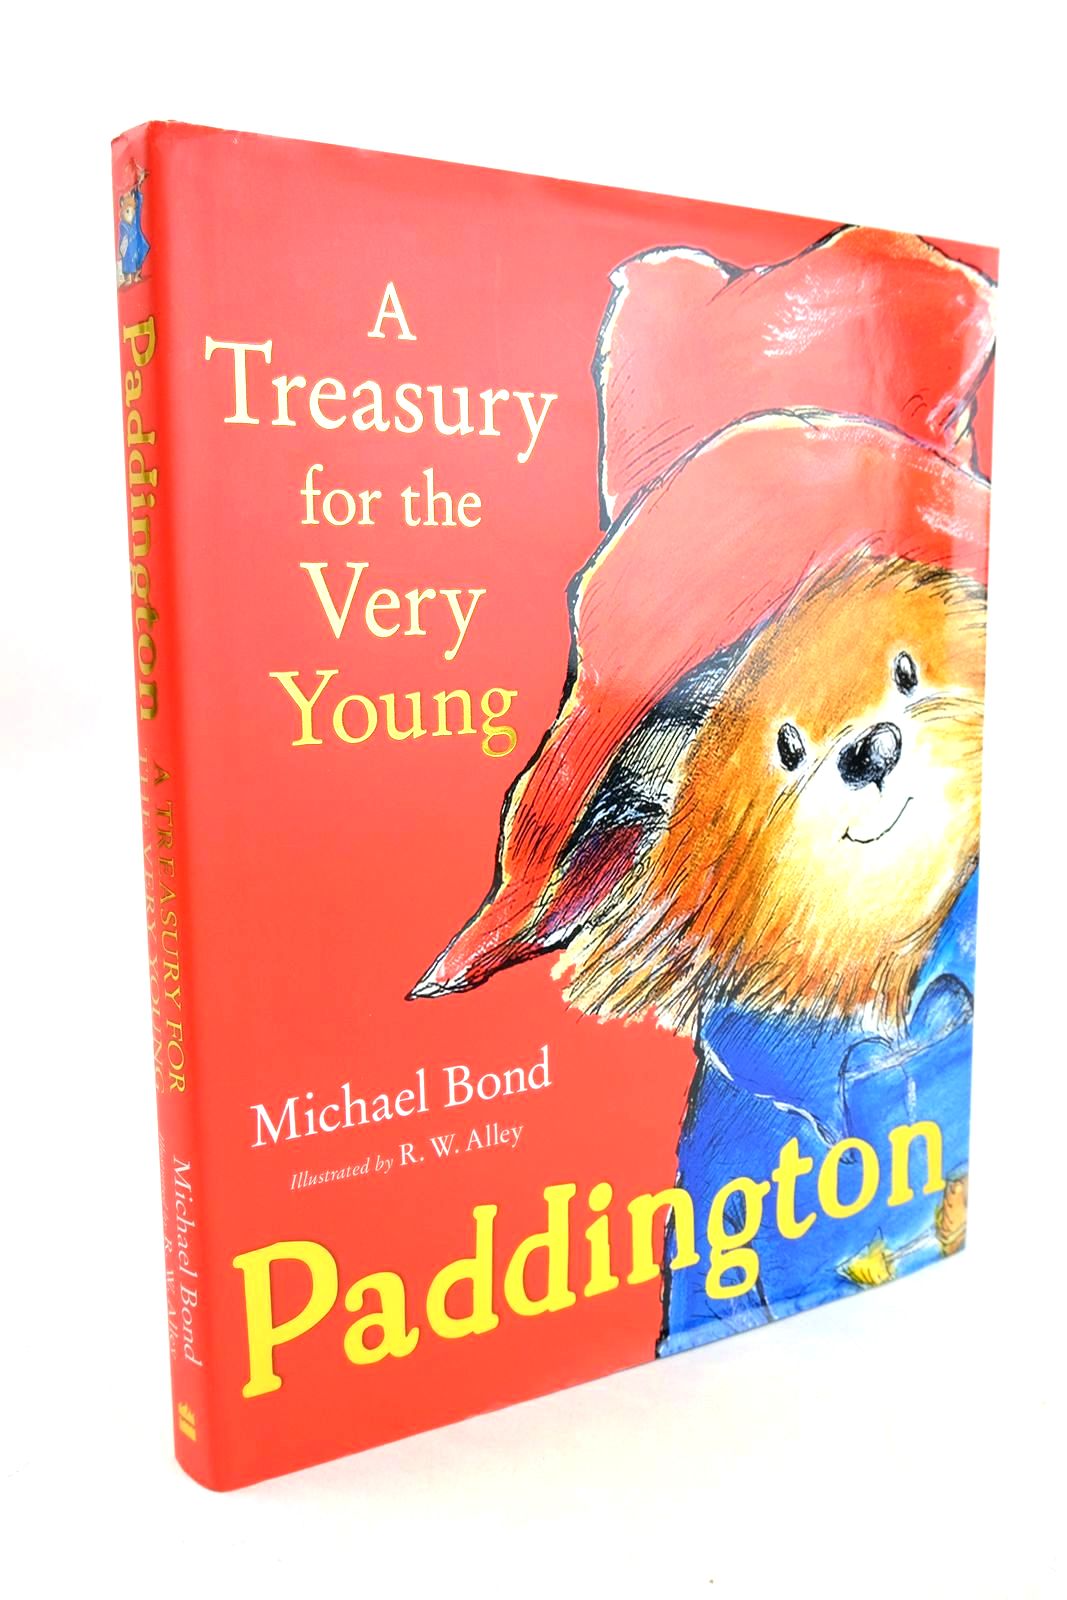 Photo of PADDINGTON: A TREASURY FOR THE VERY YOUNG written by Bond, Michael illustrated by Alley, R.W. published by Harper Collins Childrens Books (STOCK CODE: 1327533)  for sale by Stella & Rose's Books